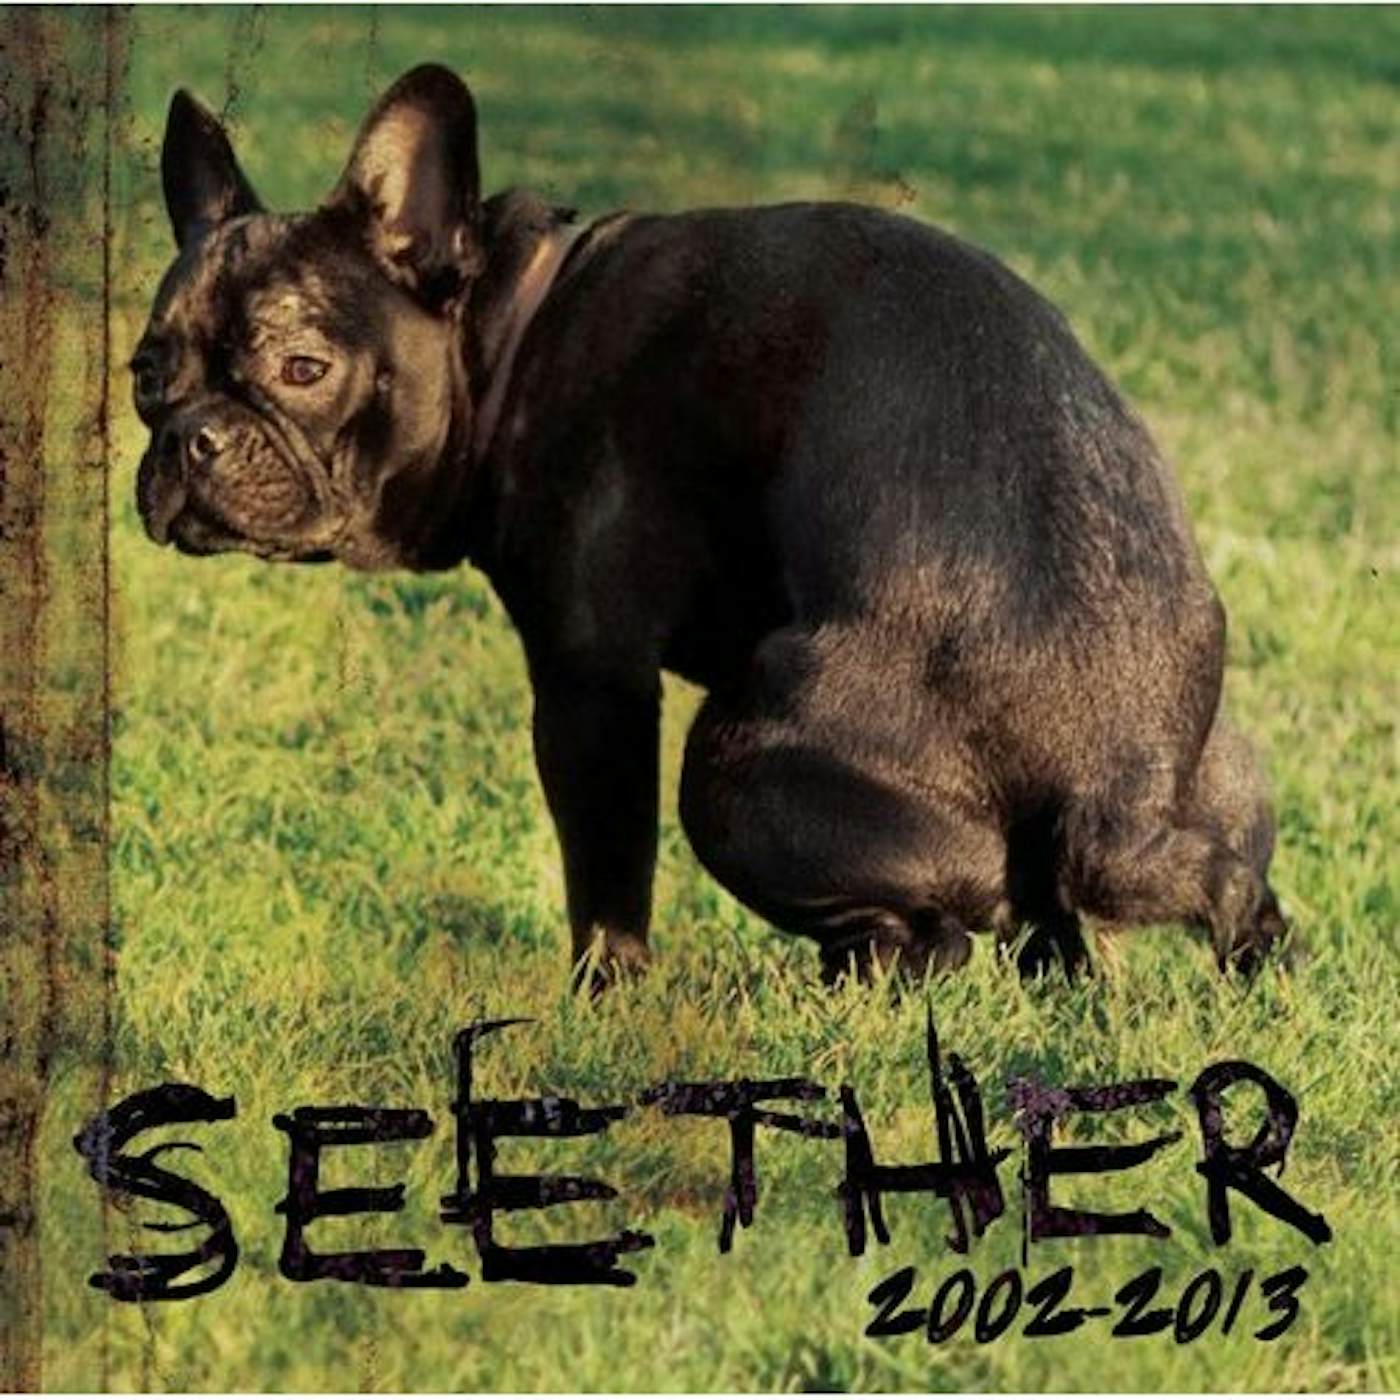 SEETHER: 2002-13 CD